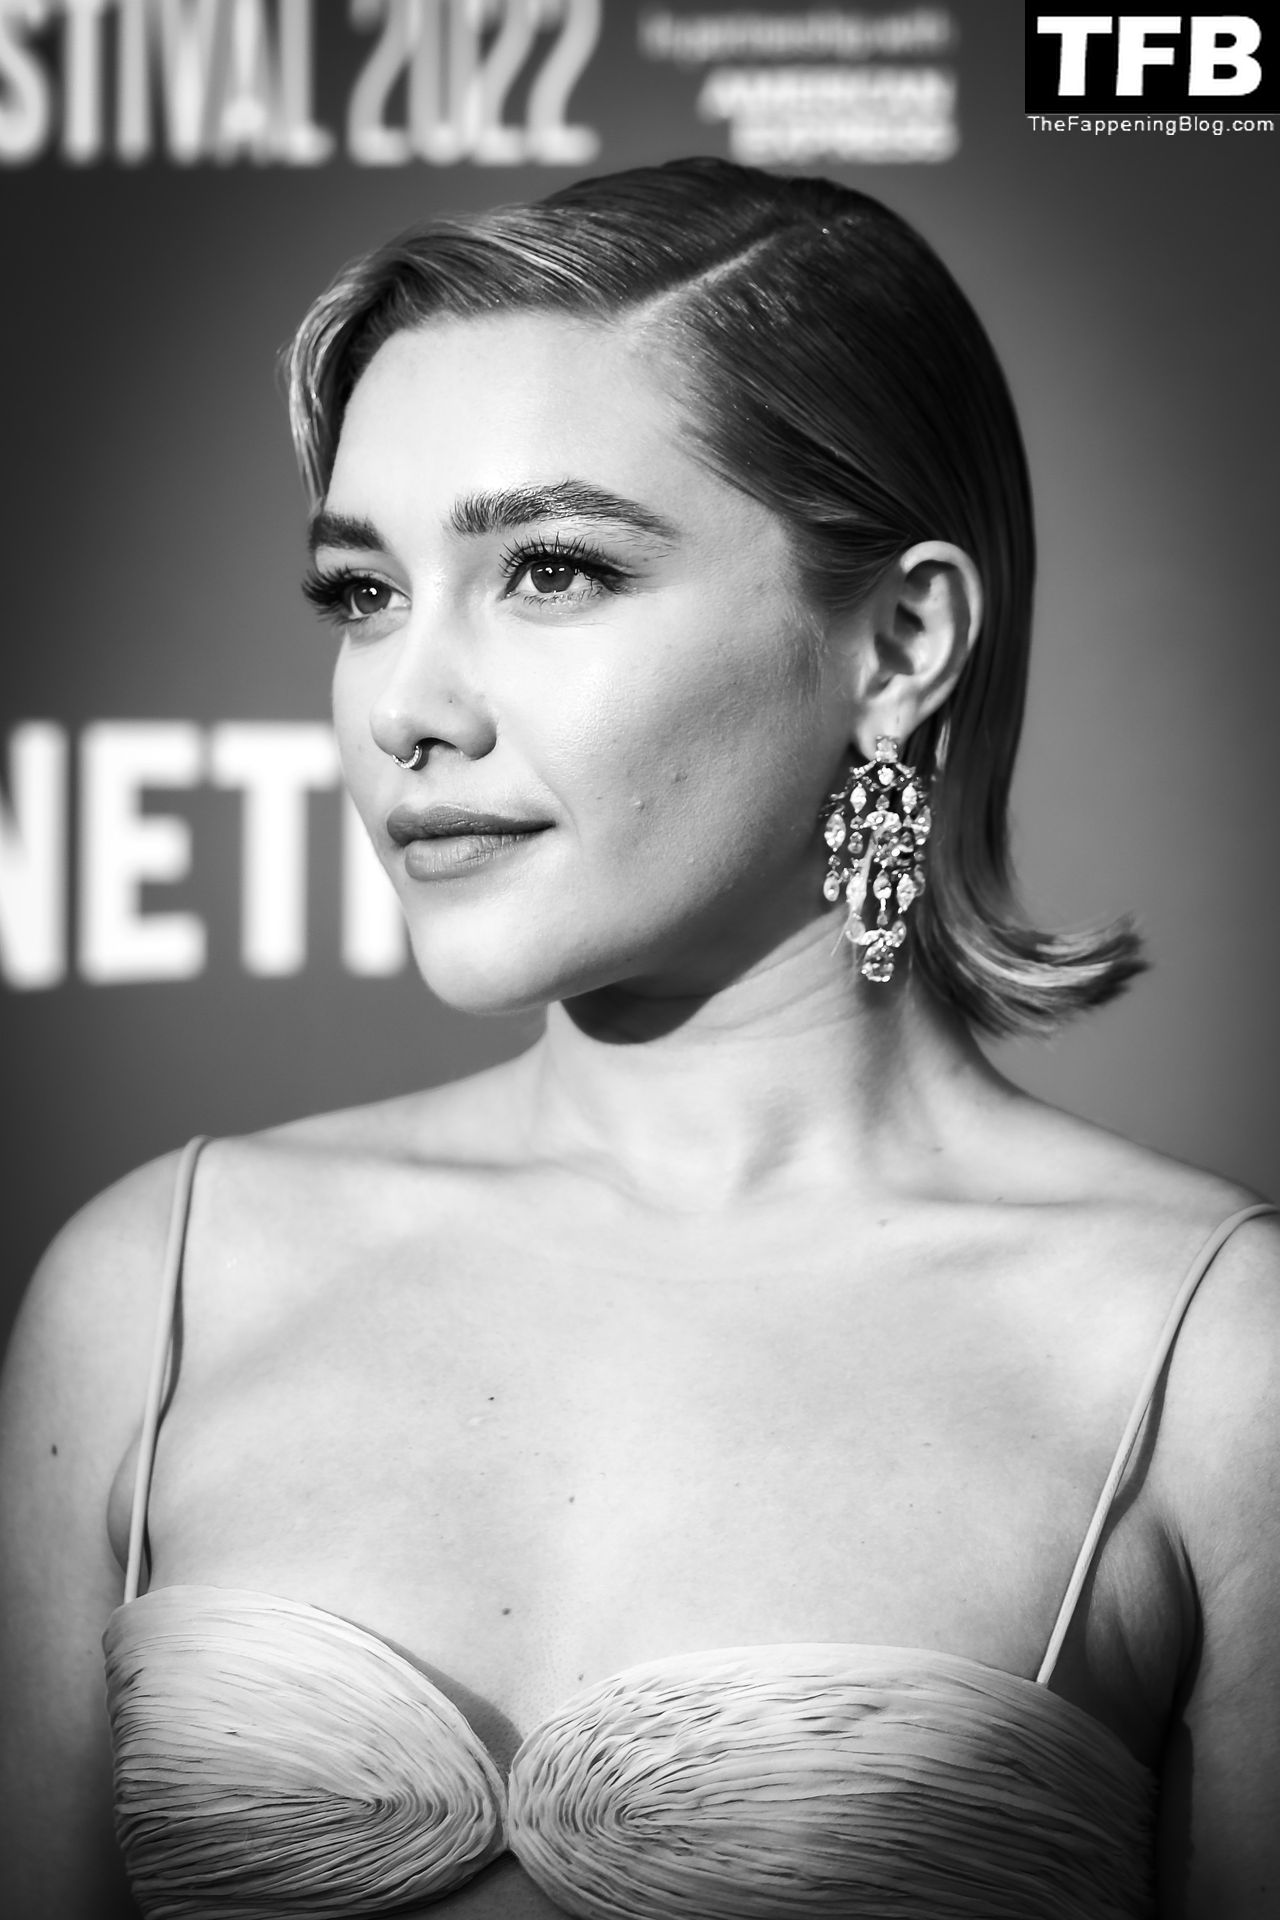 Florence-Pugh-Sexy-The-Fappening-Blog-161.jpg